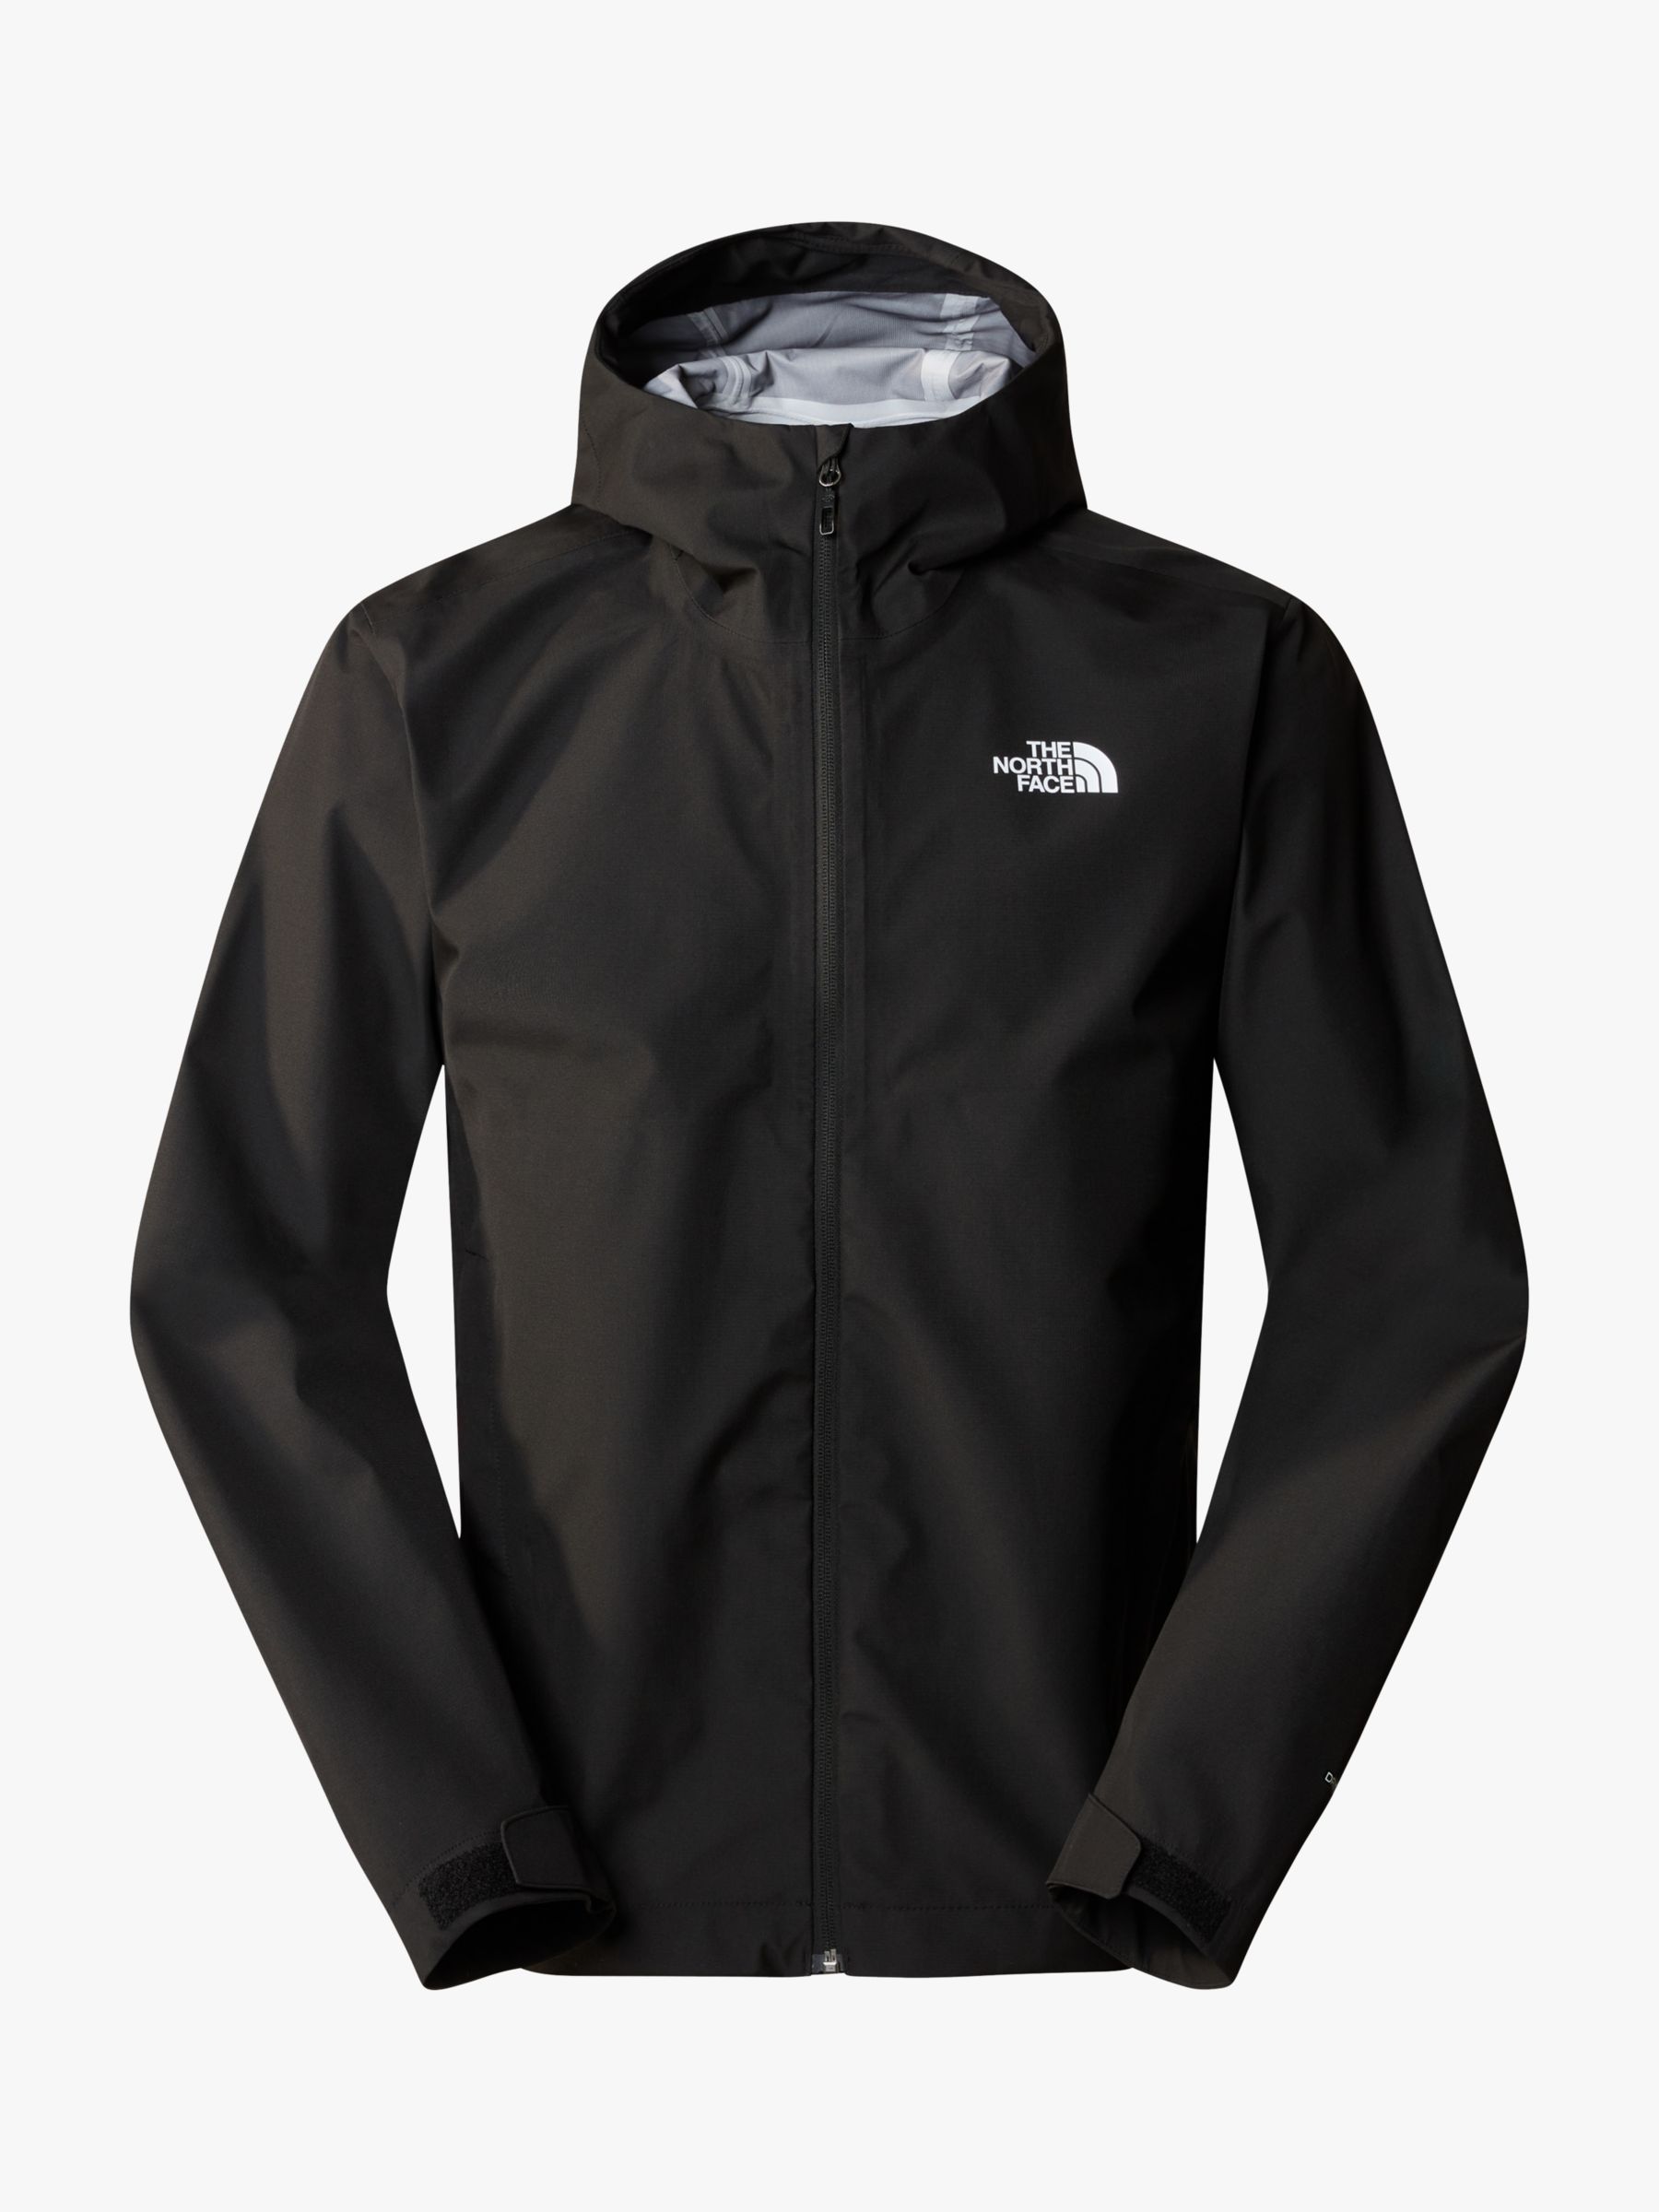 The North Face Whiton 3 Layer Jacket, Black at John Lewis & Partners